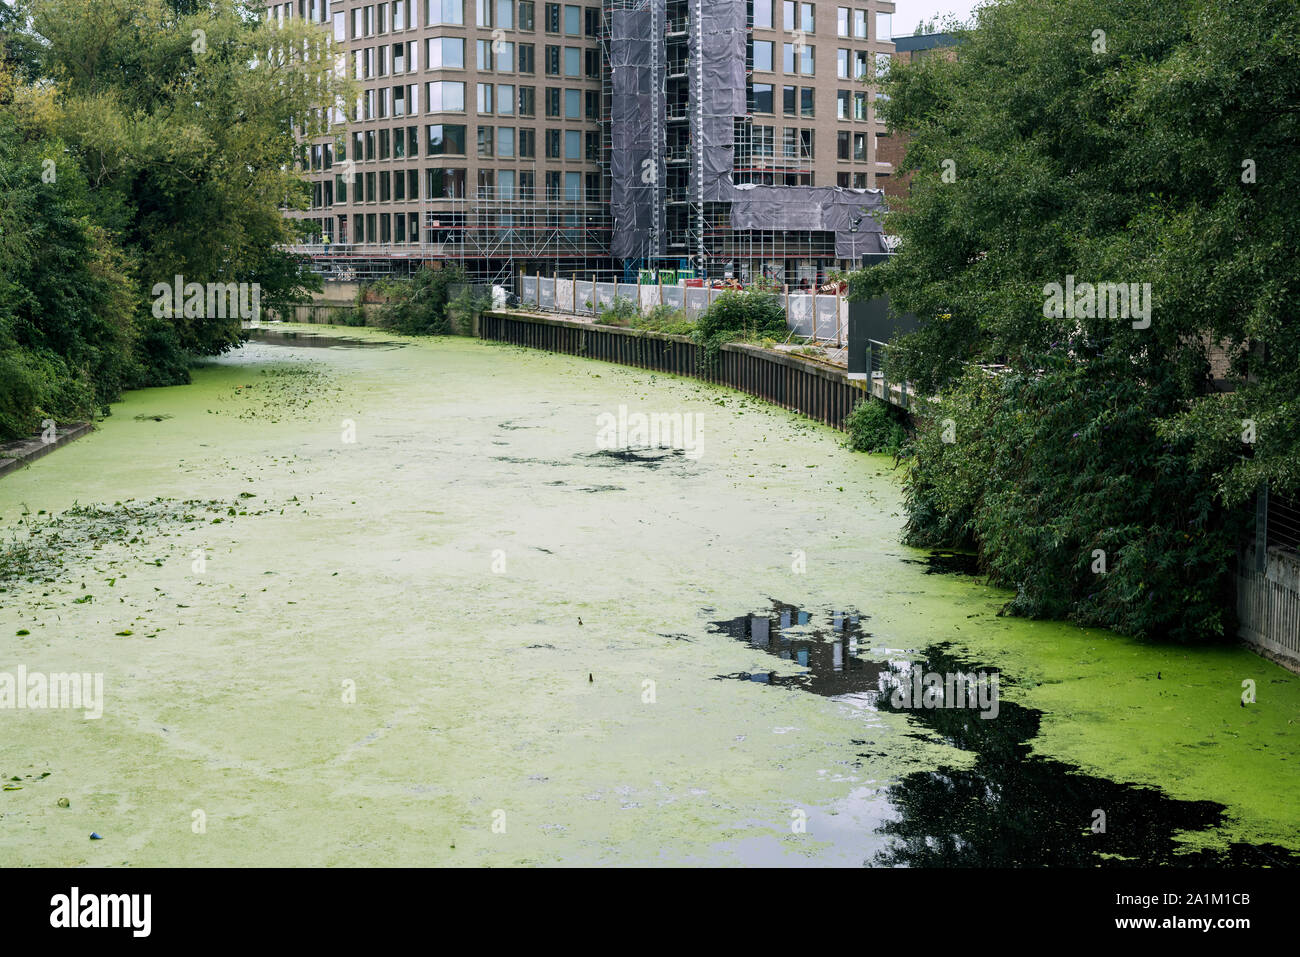 Green duckweed, Lemnoideae carpeting the River Foss, City of York, UK September 2019,  with commercial buildings in background. Stock Photo